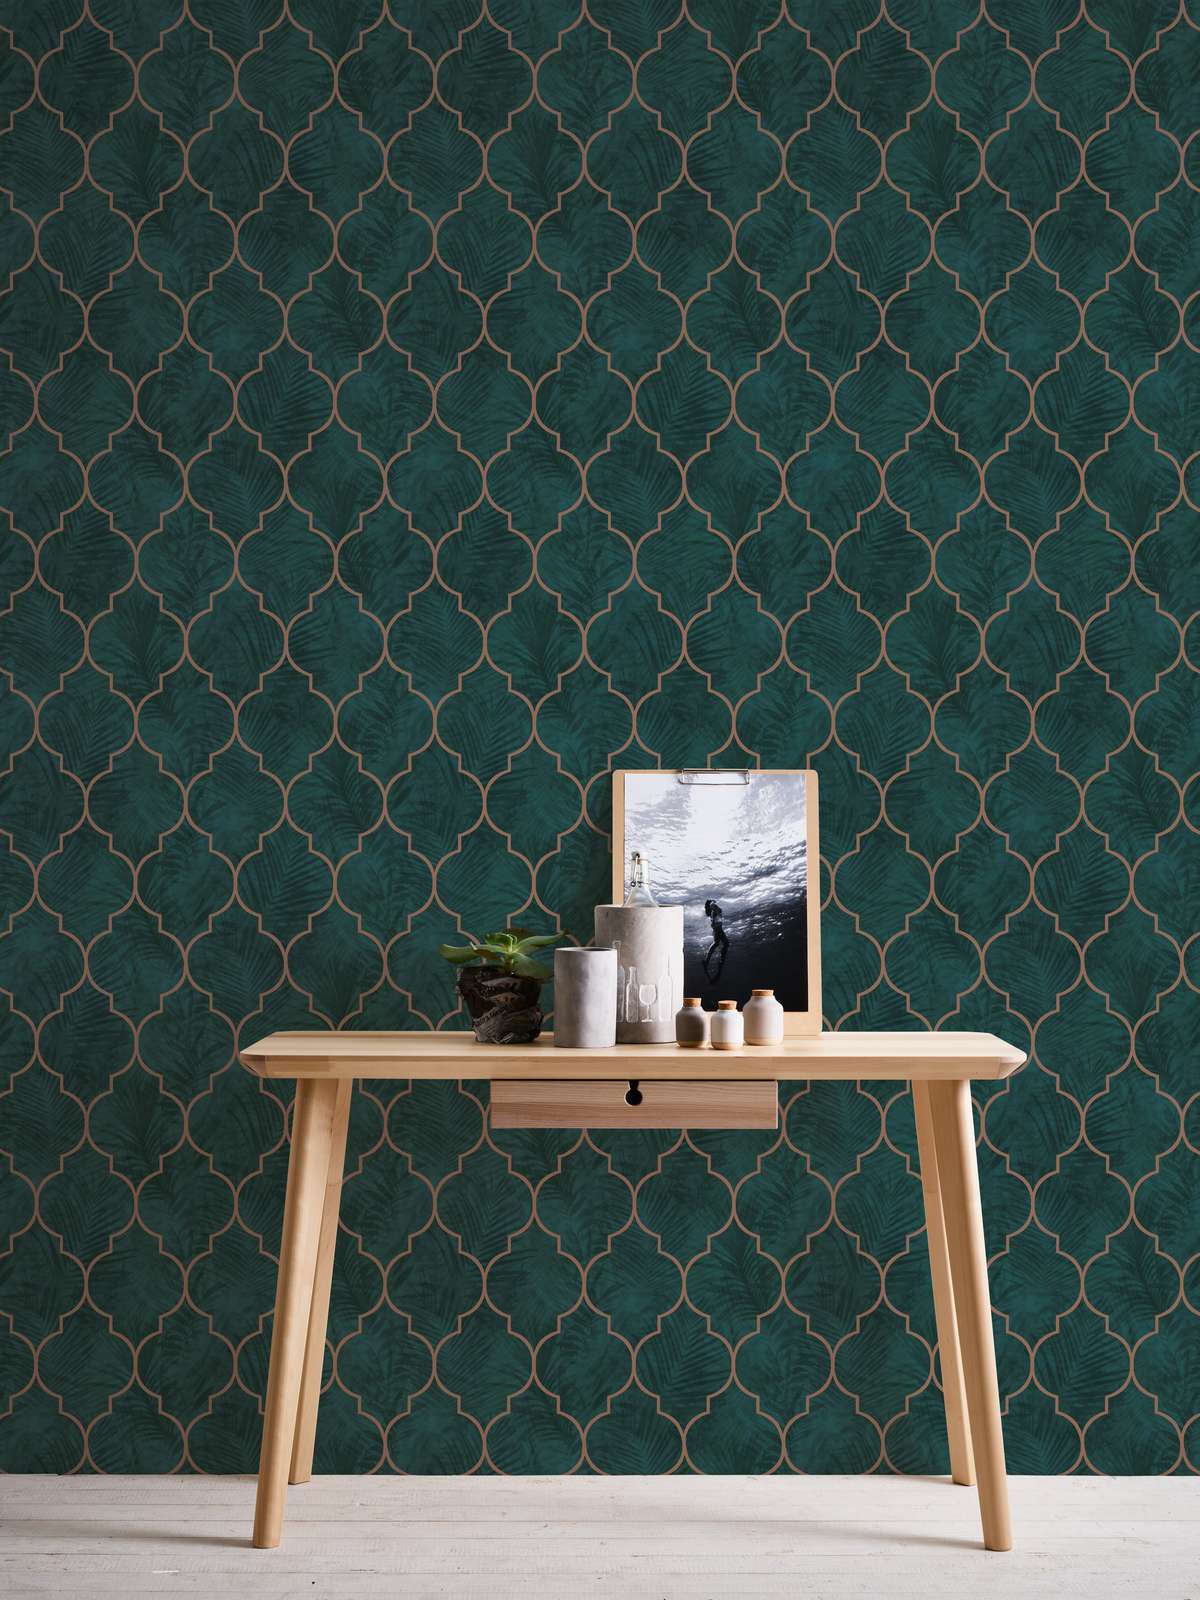             Tile wallpaper with ornament and leaf pattern - green, turquoise, brown
        